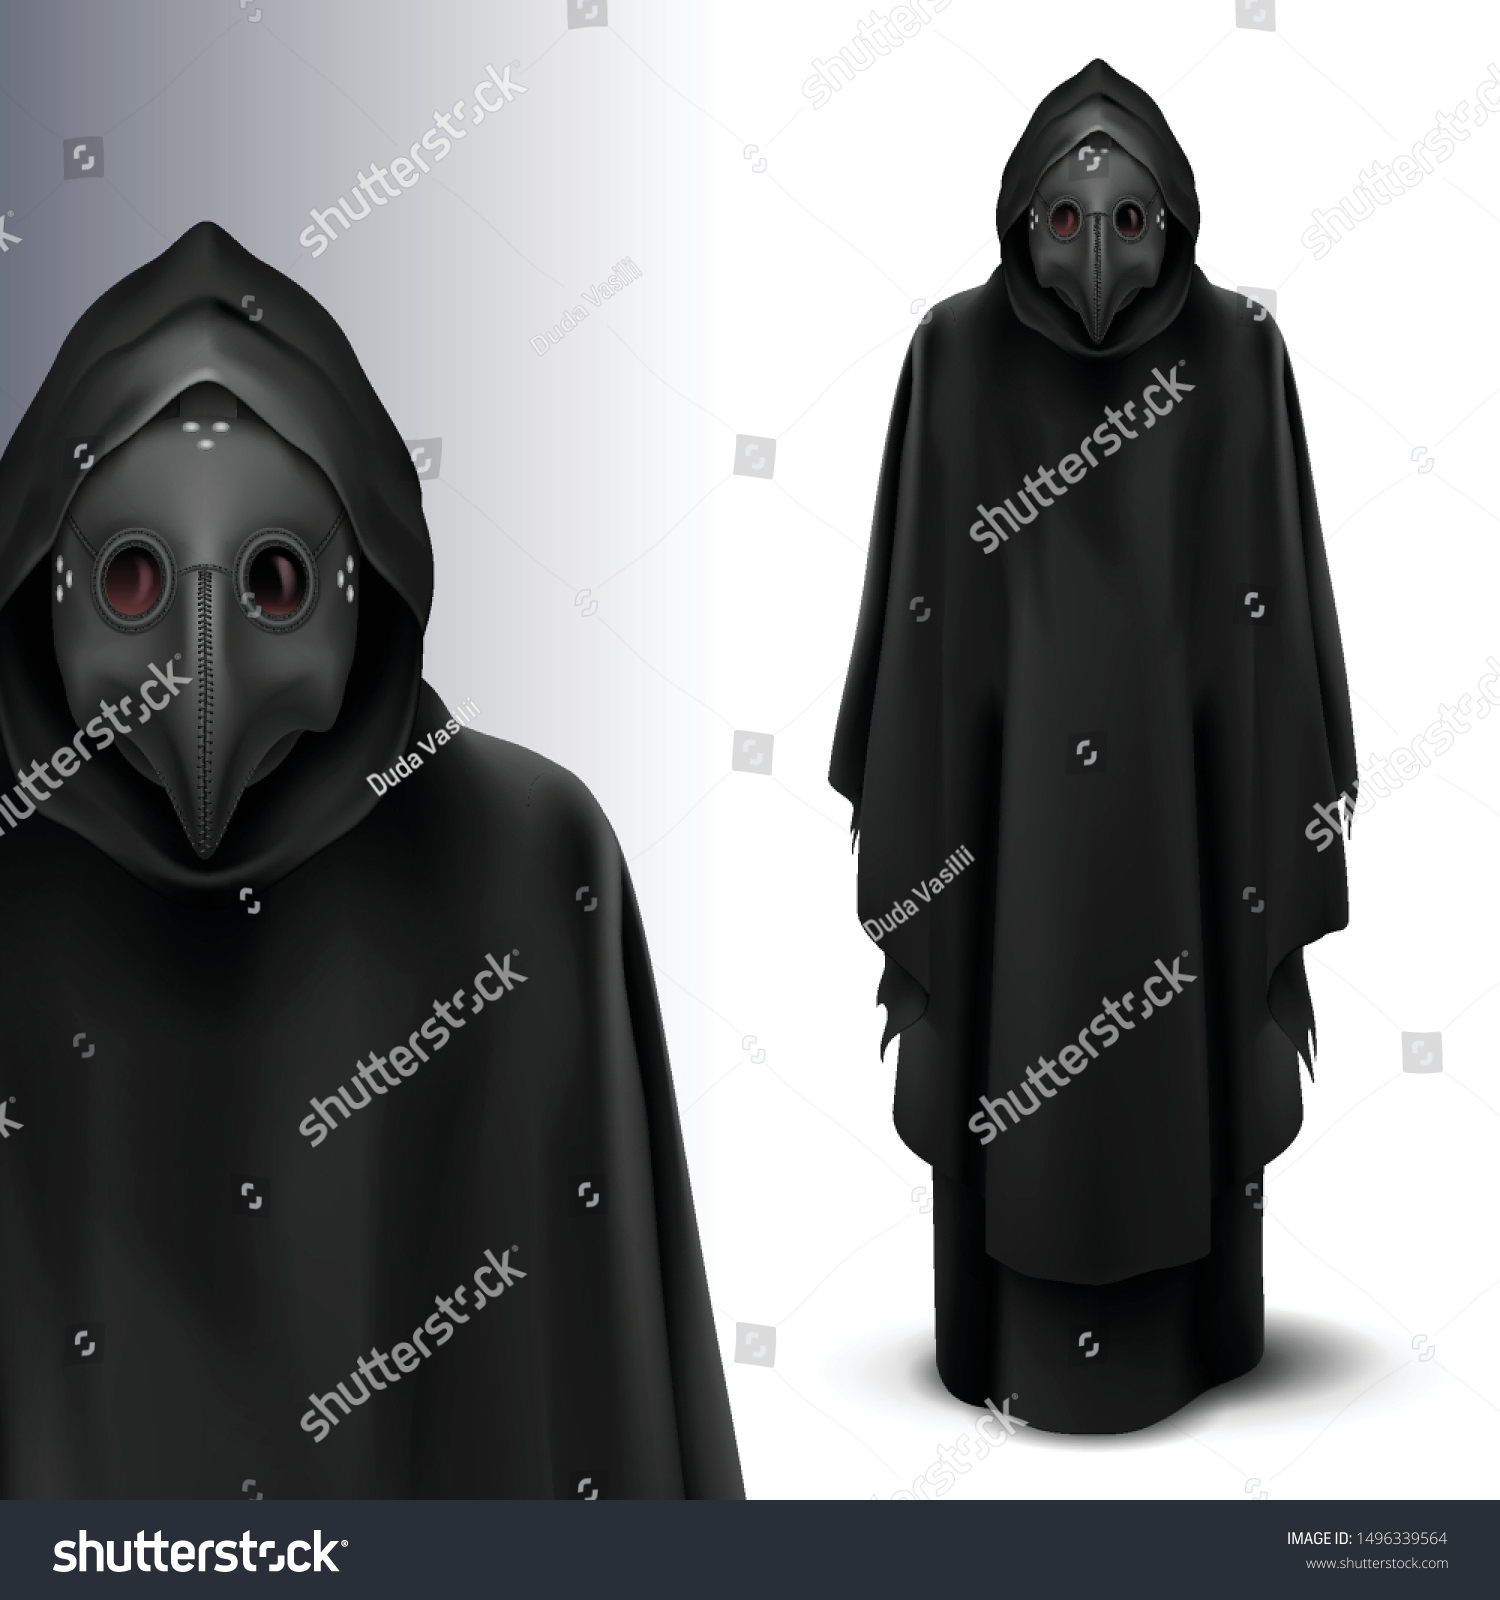 SVG of Two Black Figures of Plague Doctors. Medieval Death Symbol Plague Doctor Mask Isolated on White Background for Web, Poster, Info Graphic svg